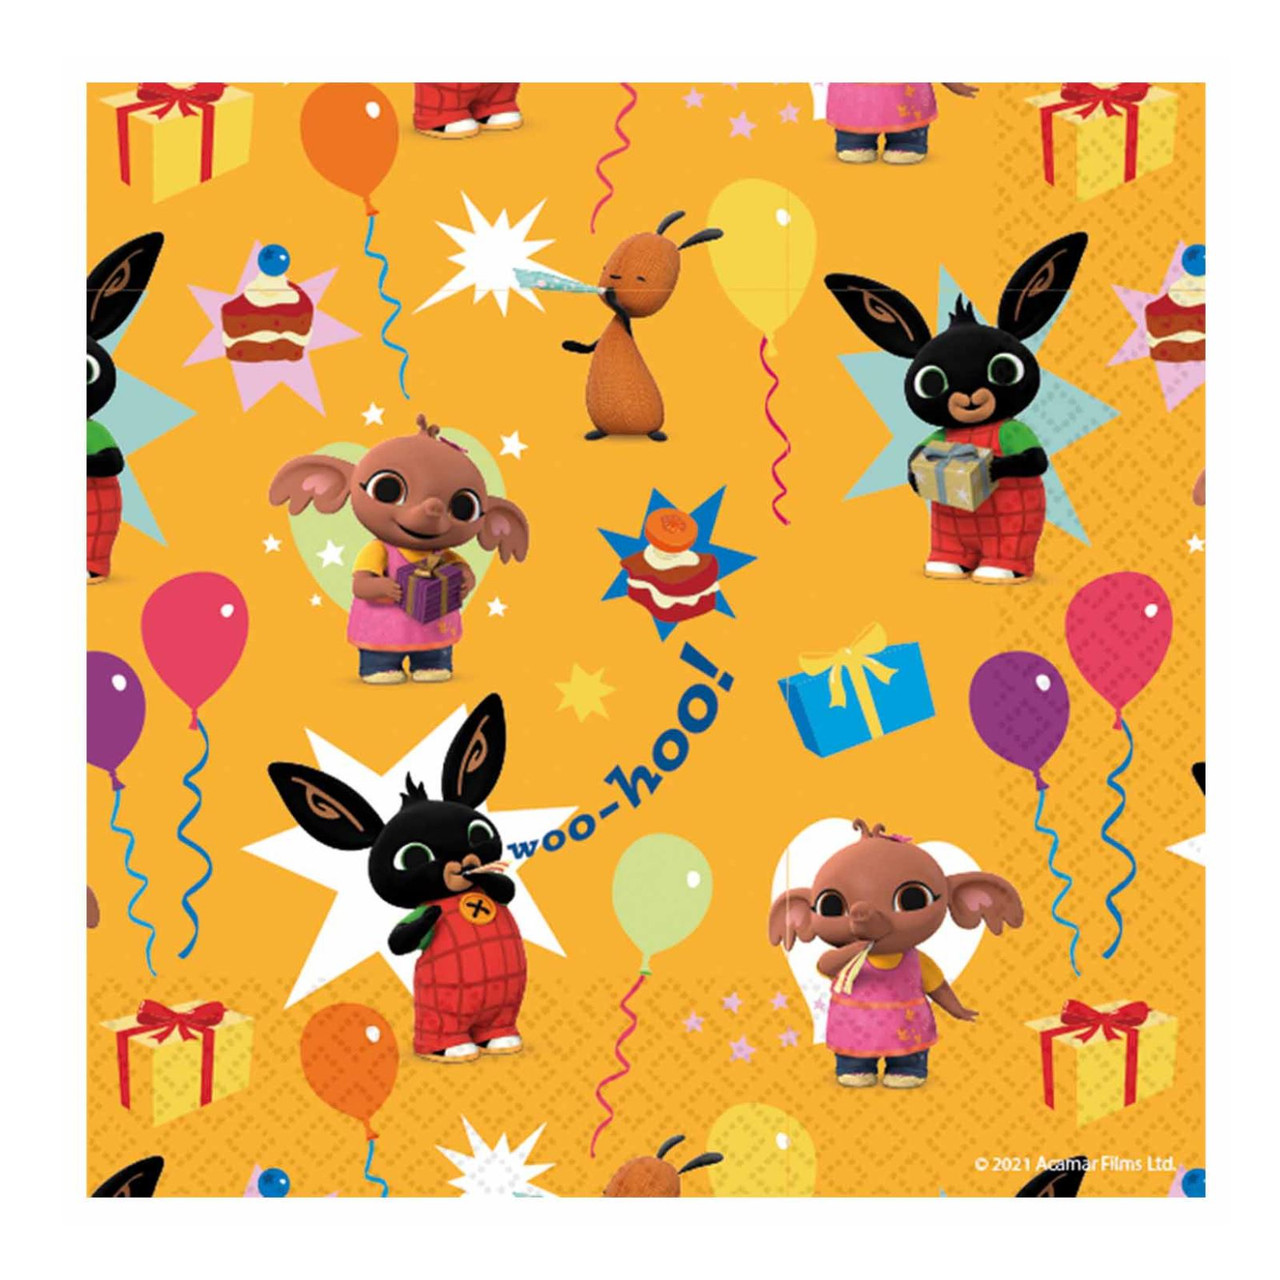 Bing Bunny Party Supplies & Decorations - Fancy Dress VIP